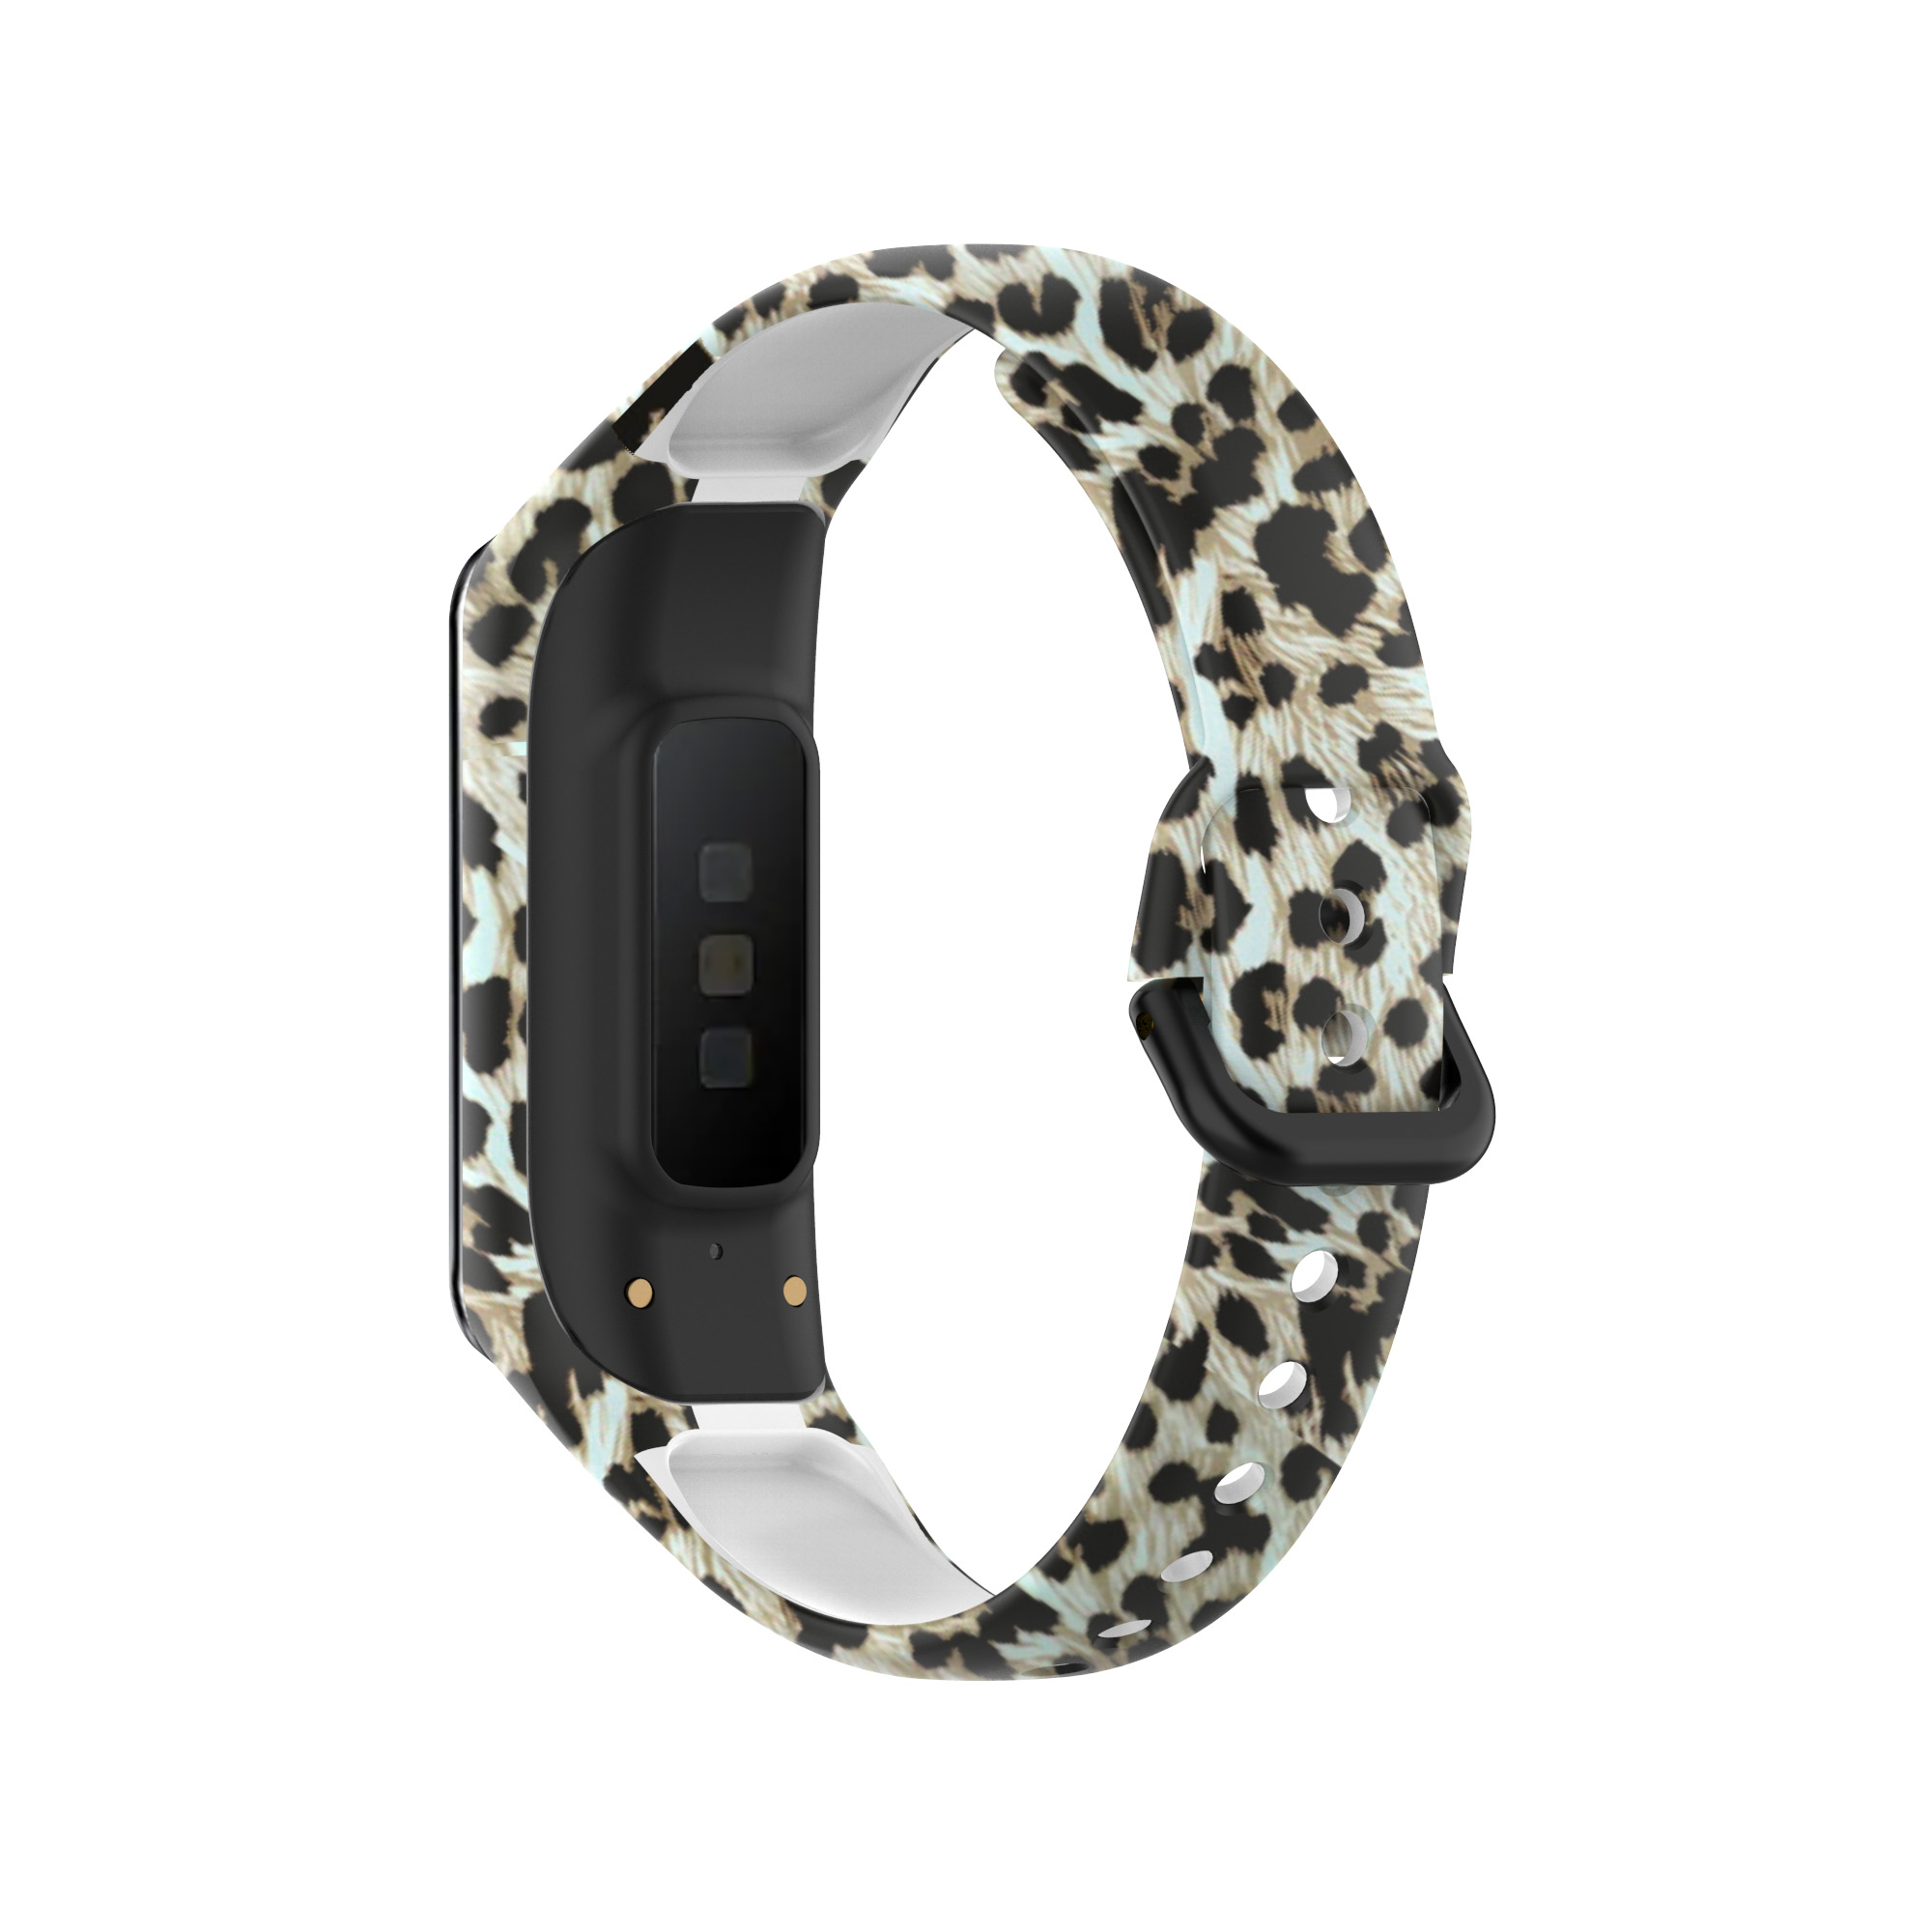 Bakeey-Printed-Pattern-Stainless-Steel-Buckle-Smart-watch-Band-Replacement-Strap-For-Samsung-Galaxy--1806217-36